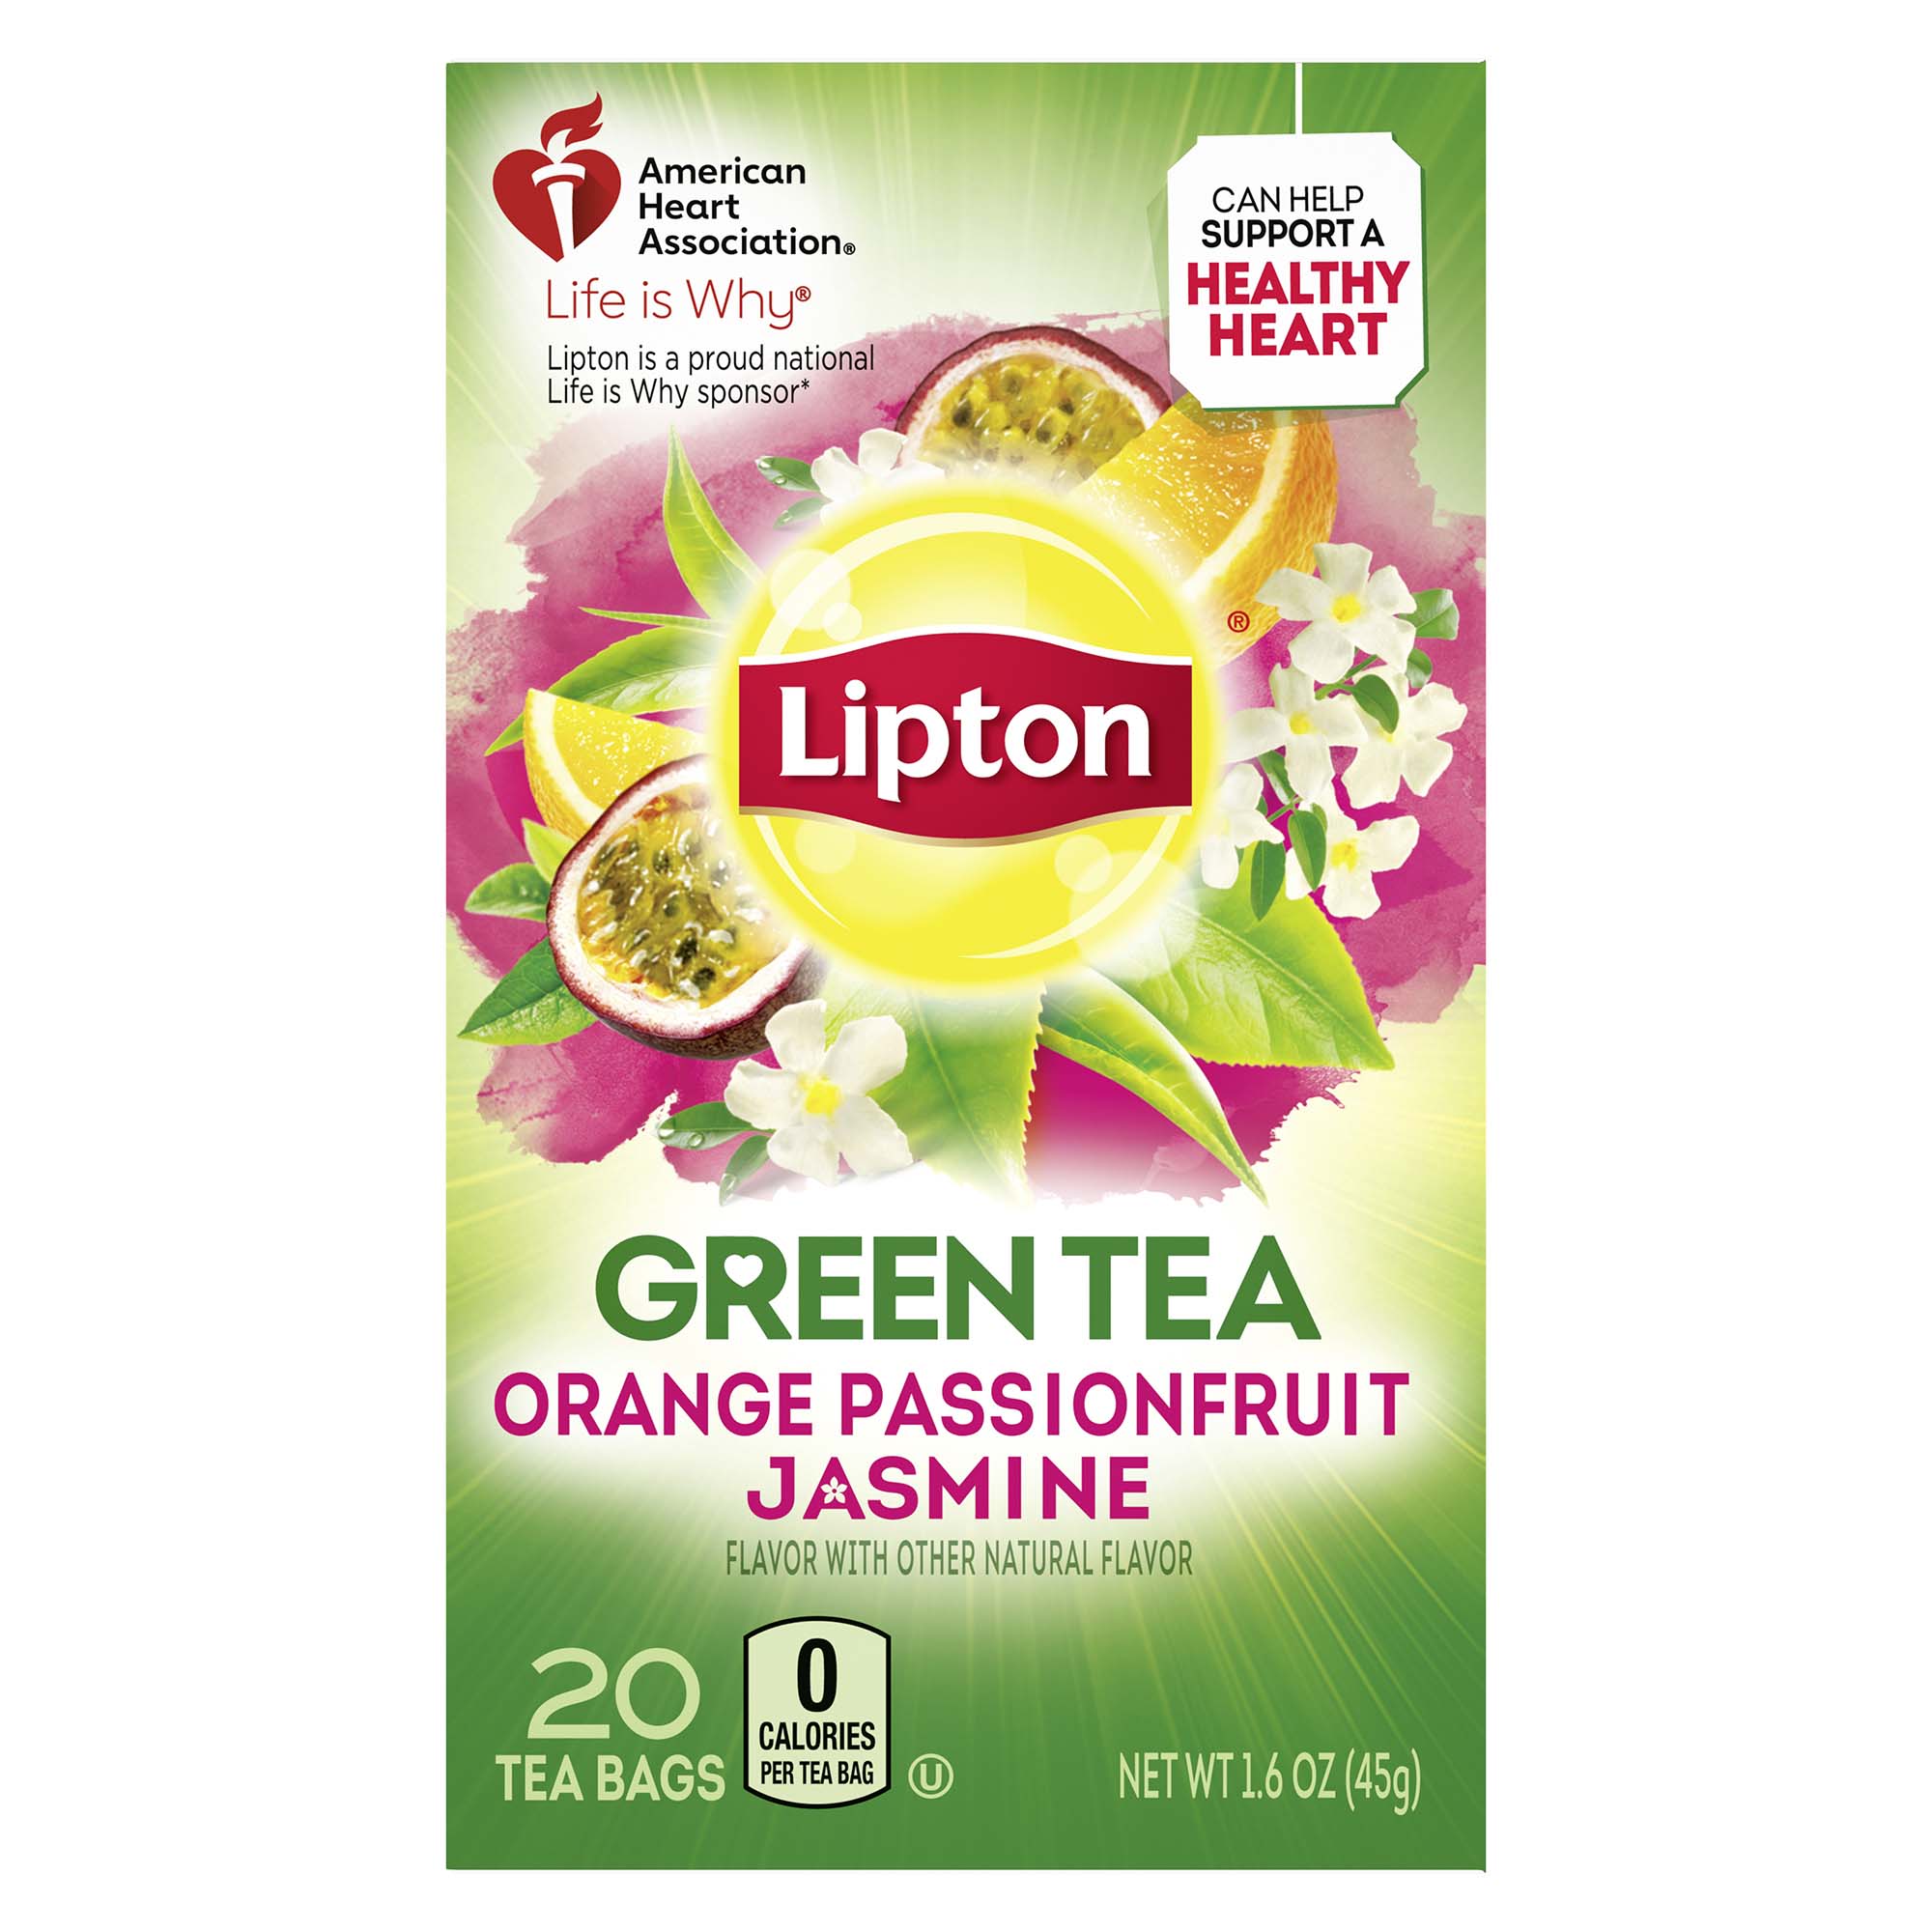 Lipton Green Tea Bags Orange Passionfruit Jasmine Flavored with Other Natural Flavors Can Help Support a Healthy Heart 1.13 oz 20 Count - image 1 of 9